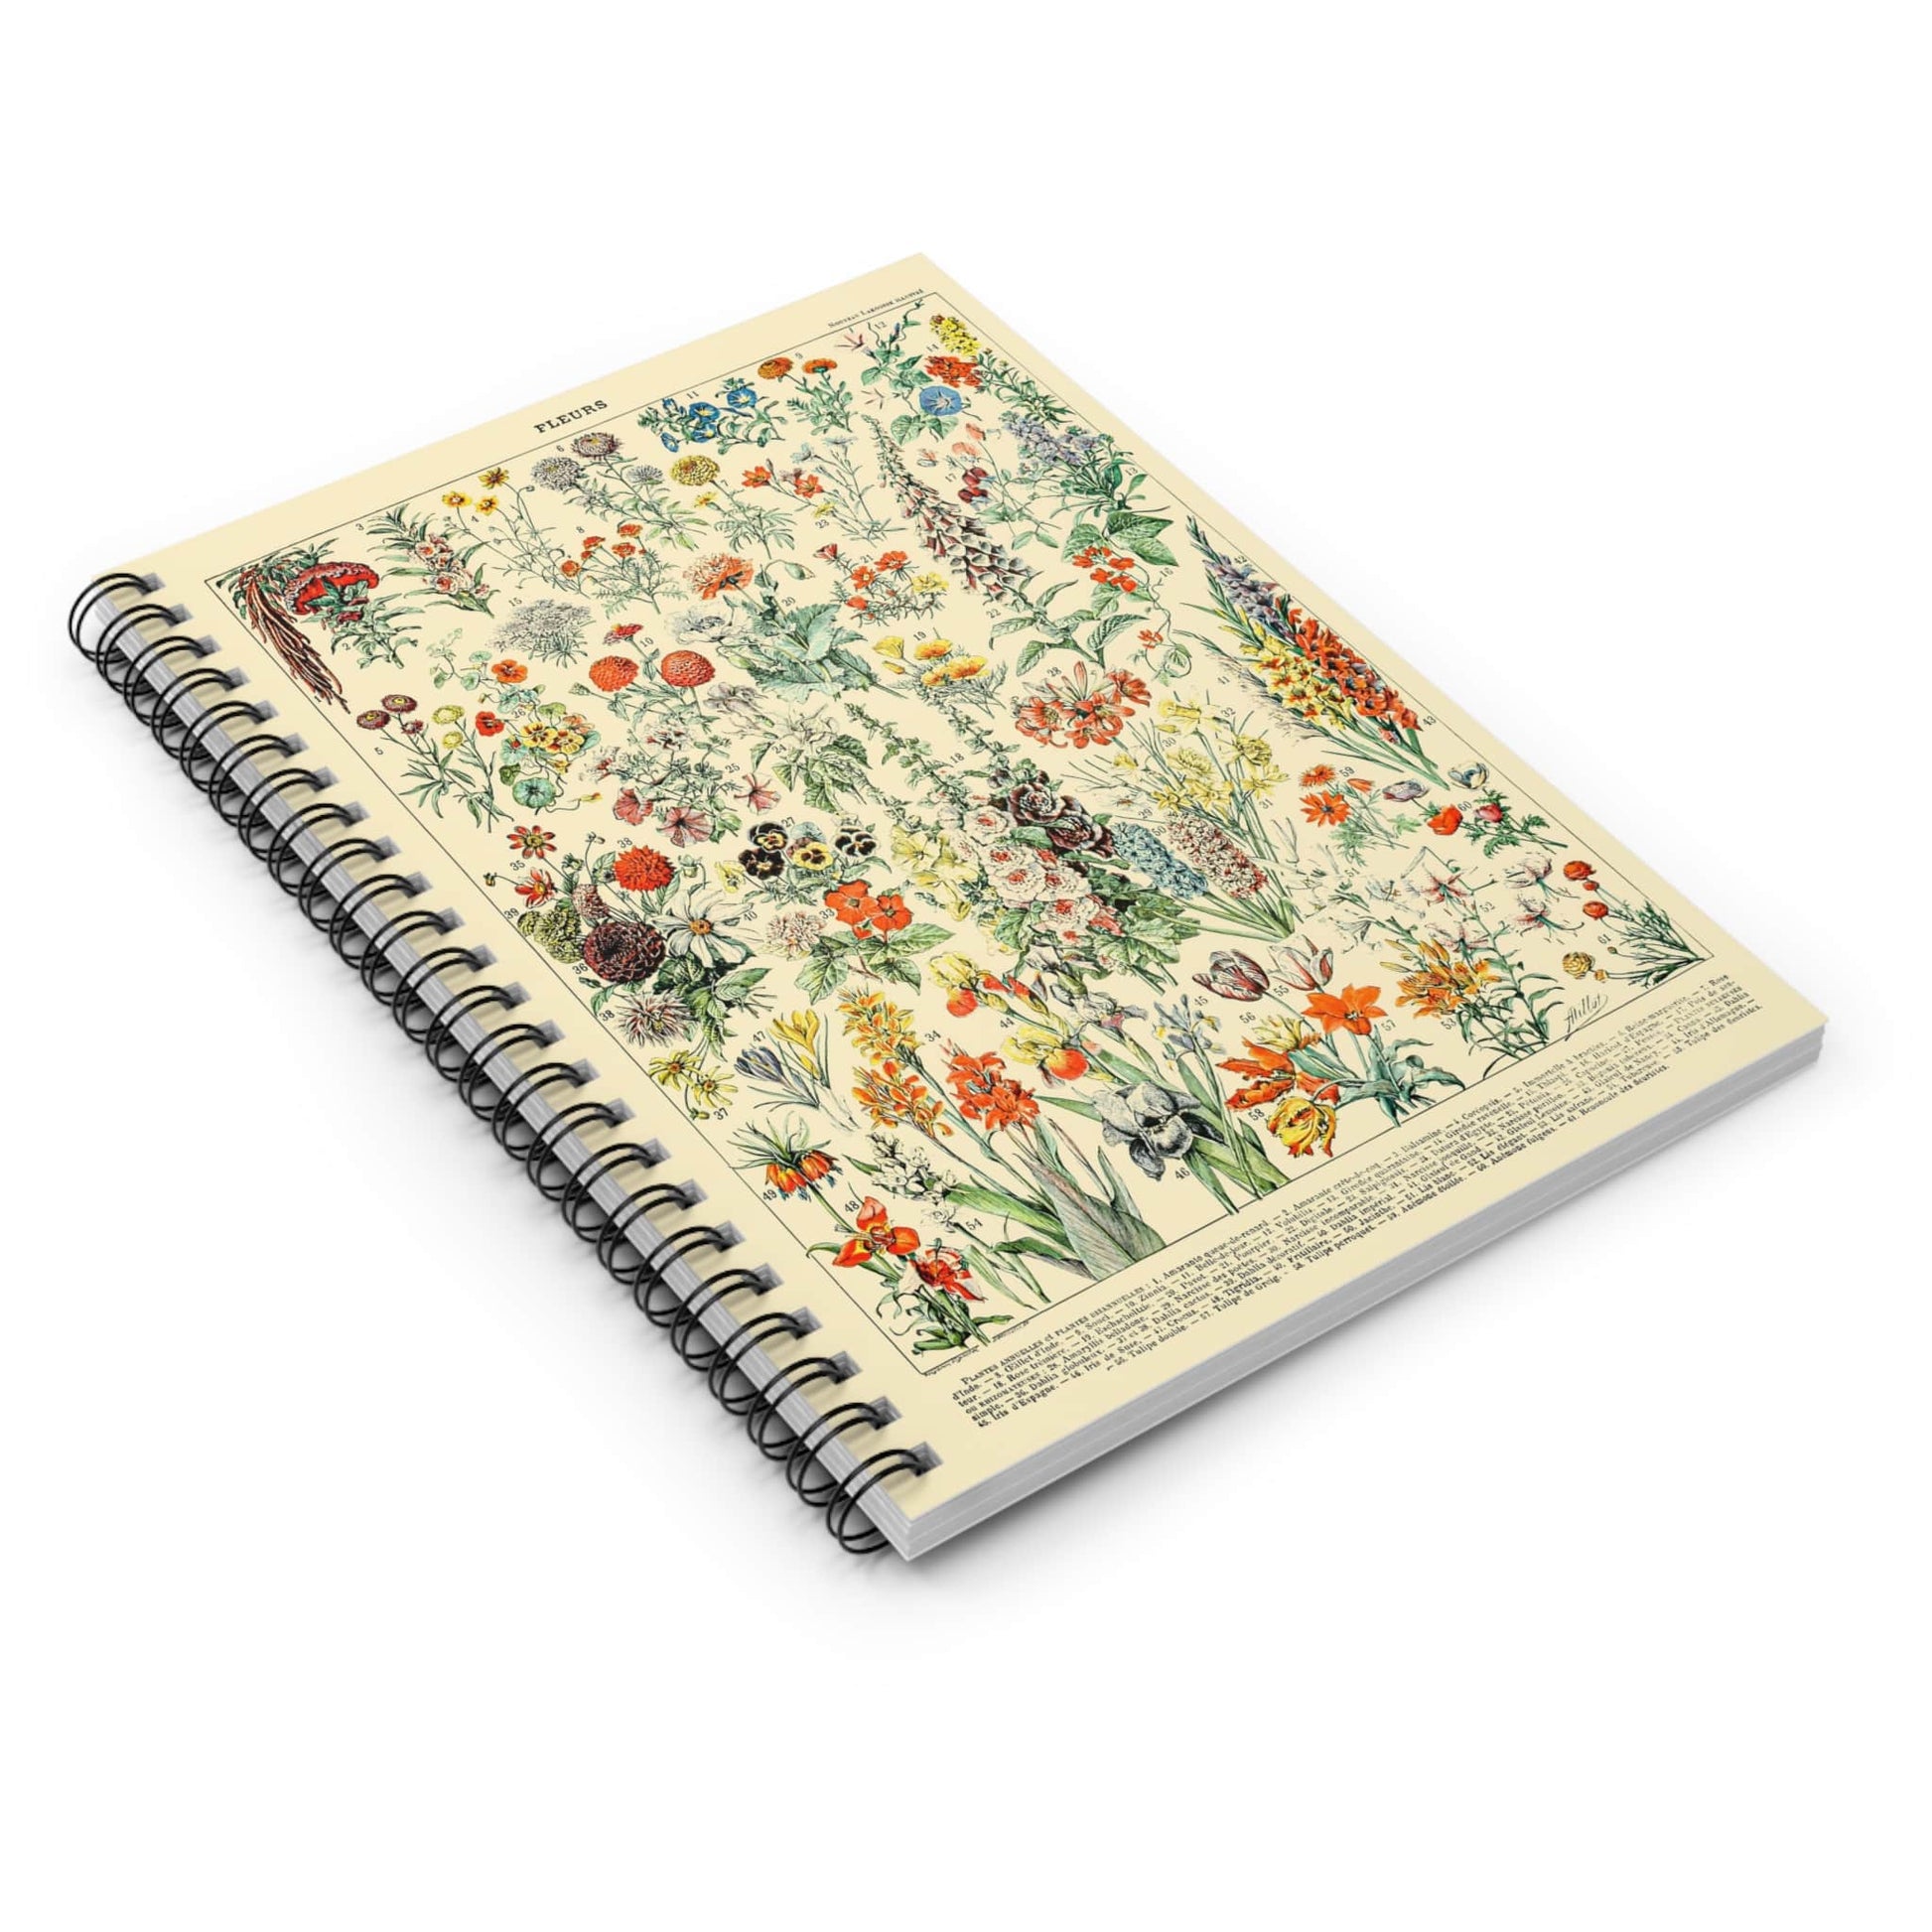 Wildflower Spiral Notebook Laying Flat on White Surface